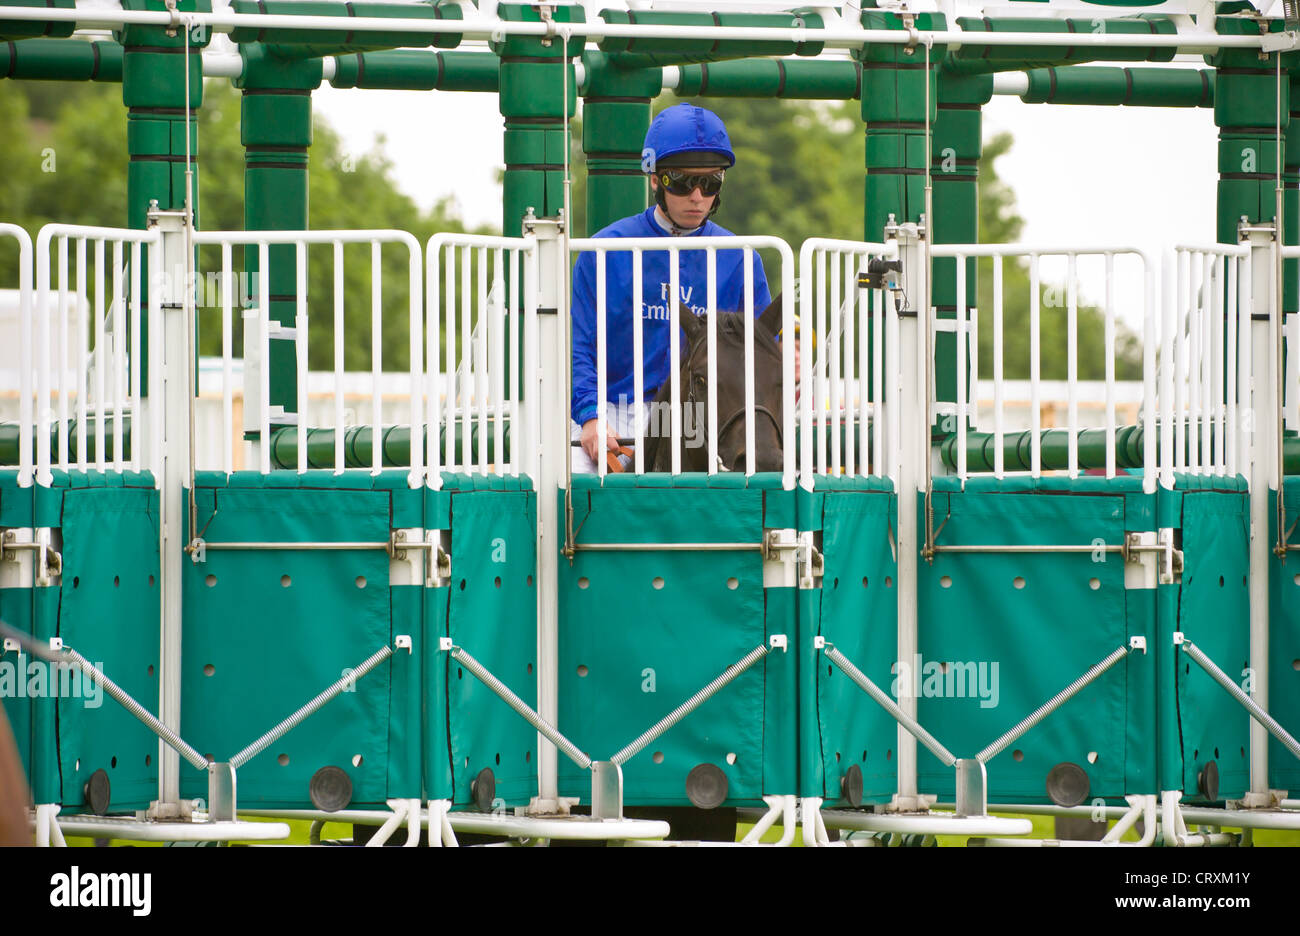 Starting gates for horse racing with one horse and rider ready Stock Photo